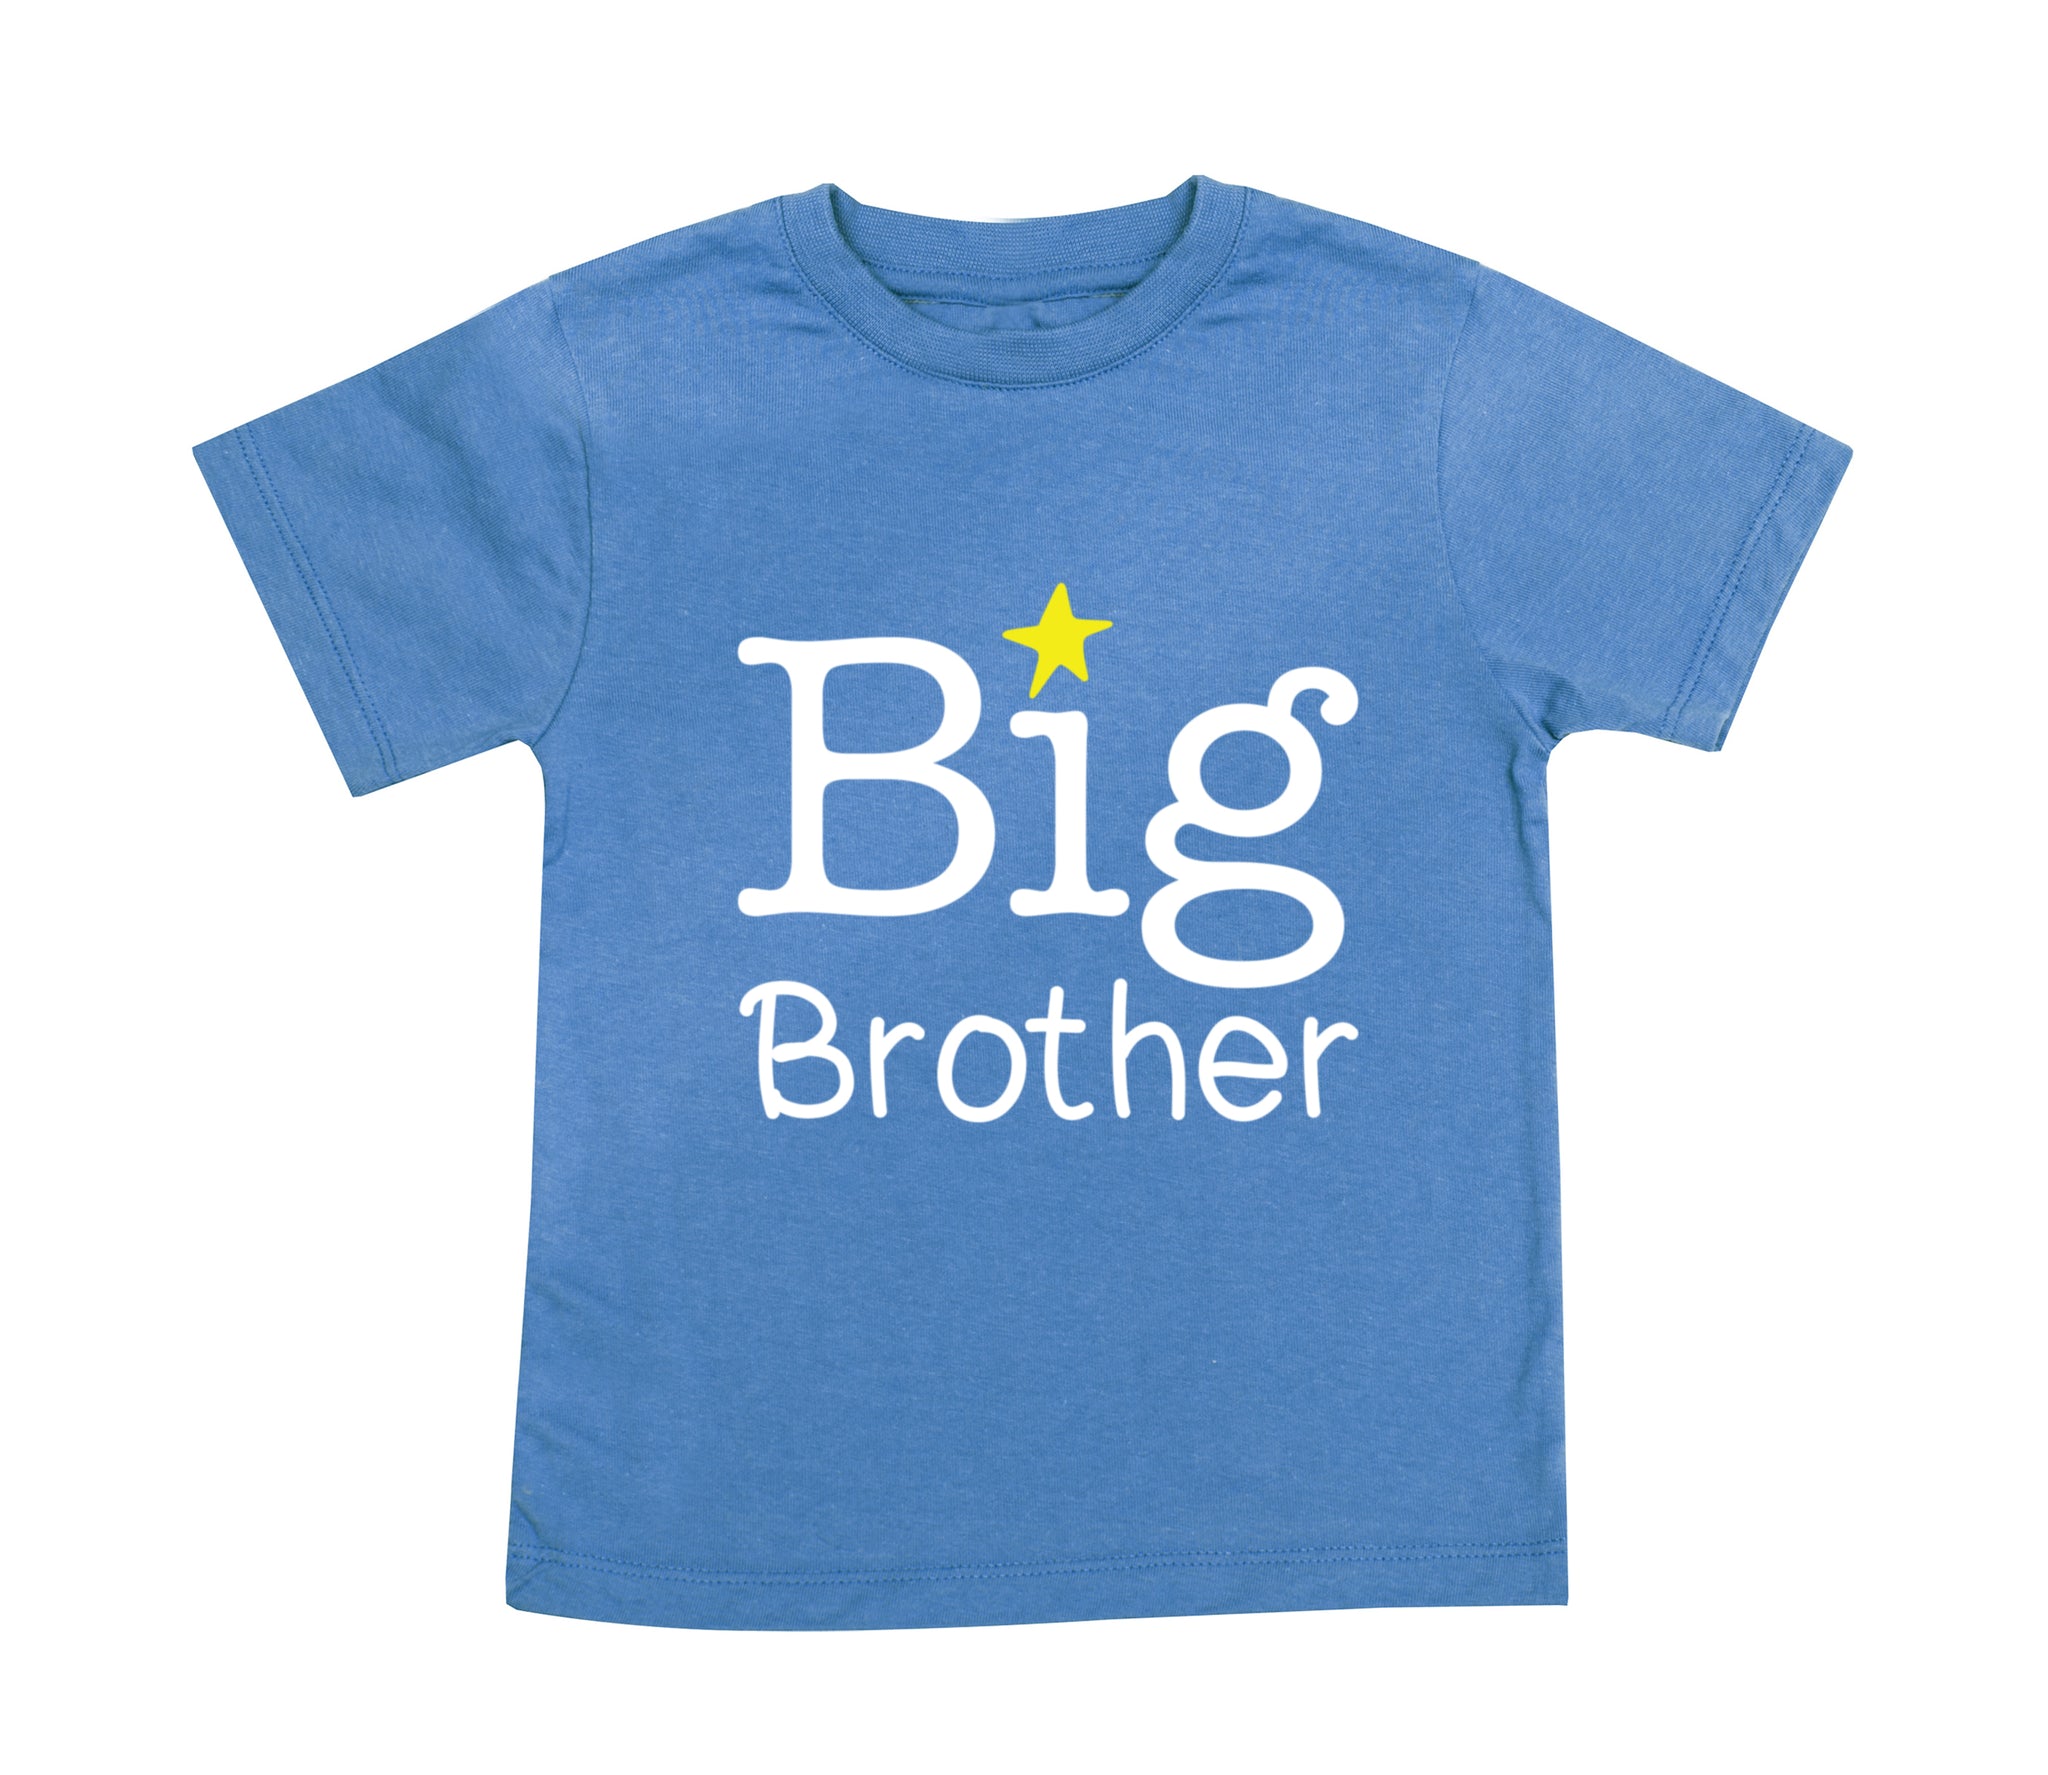 Big Brother T-shirt T Shirt Older Sibling Pregnancy Announcement Tees Toddler Boys Blue